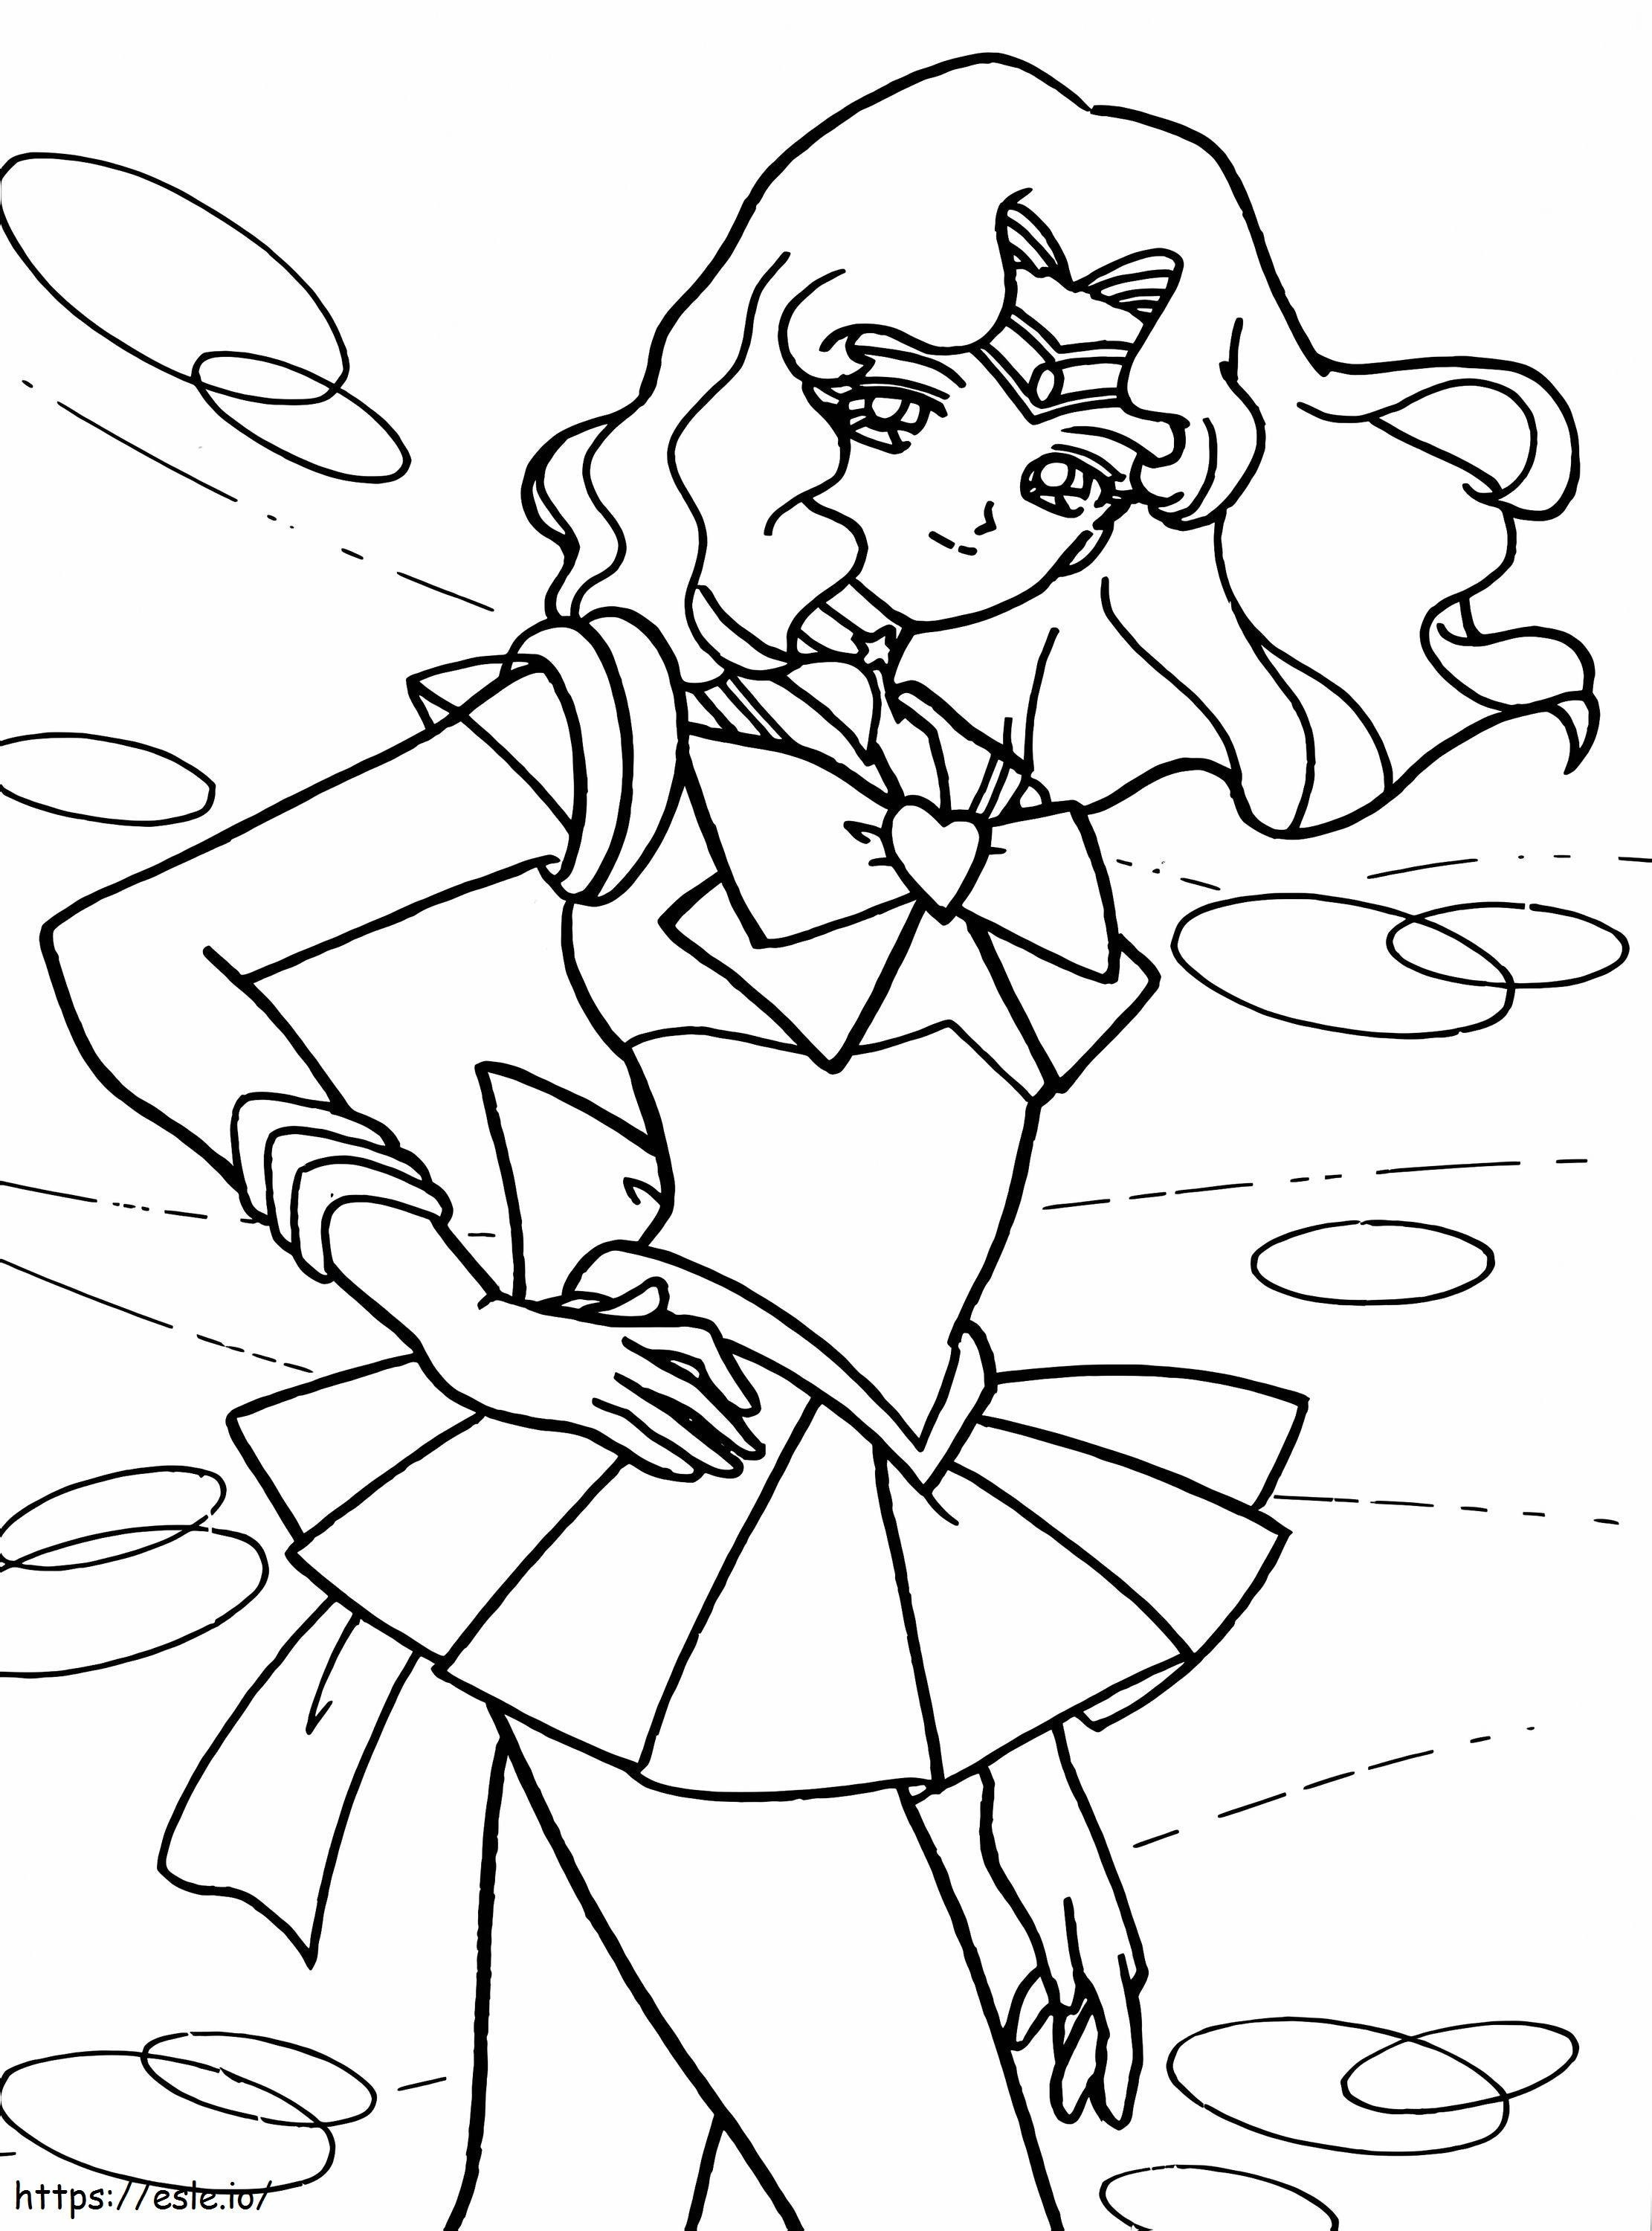 Lovely Sailor Neptune coloring page